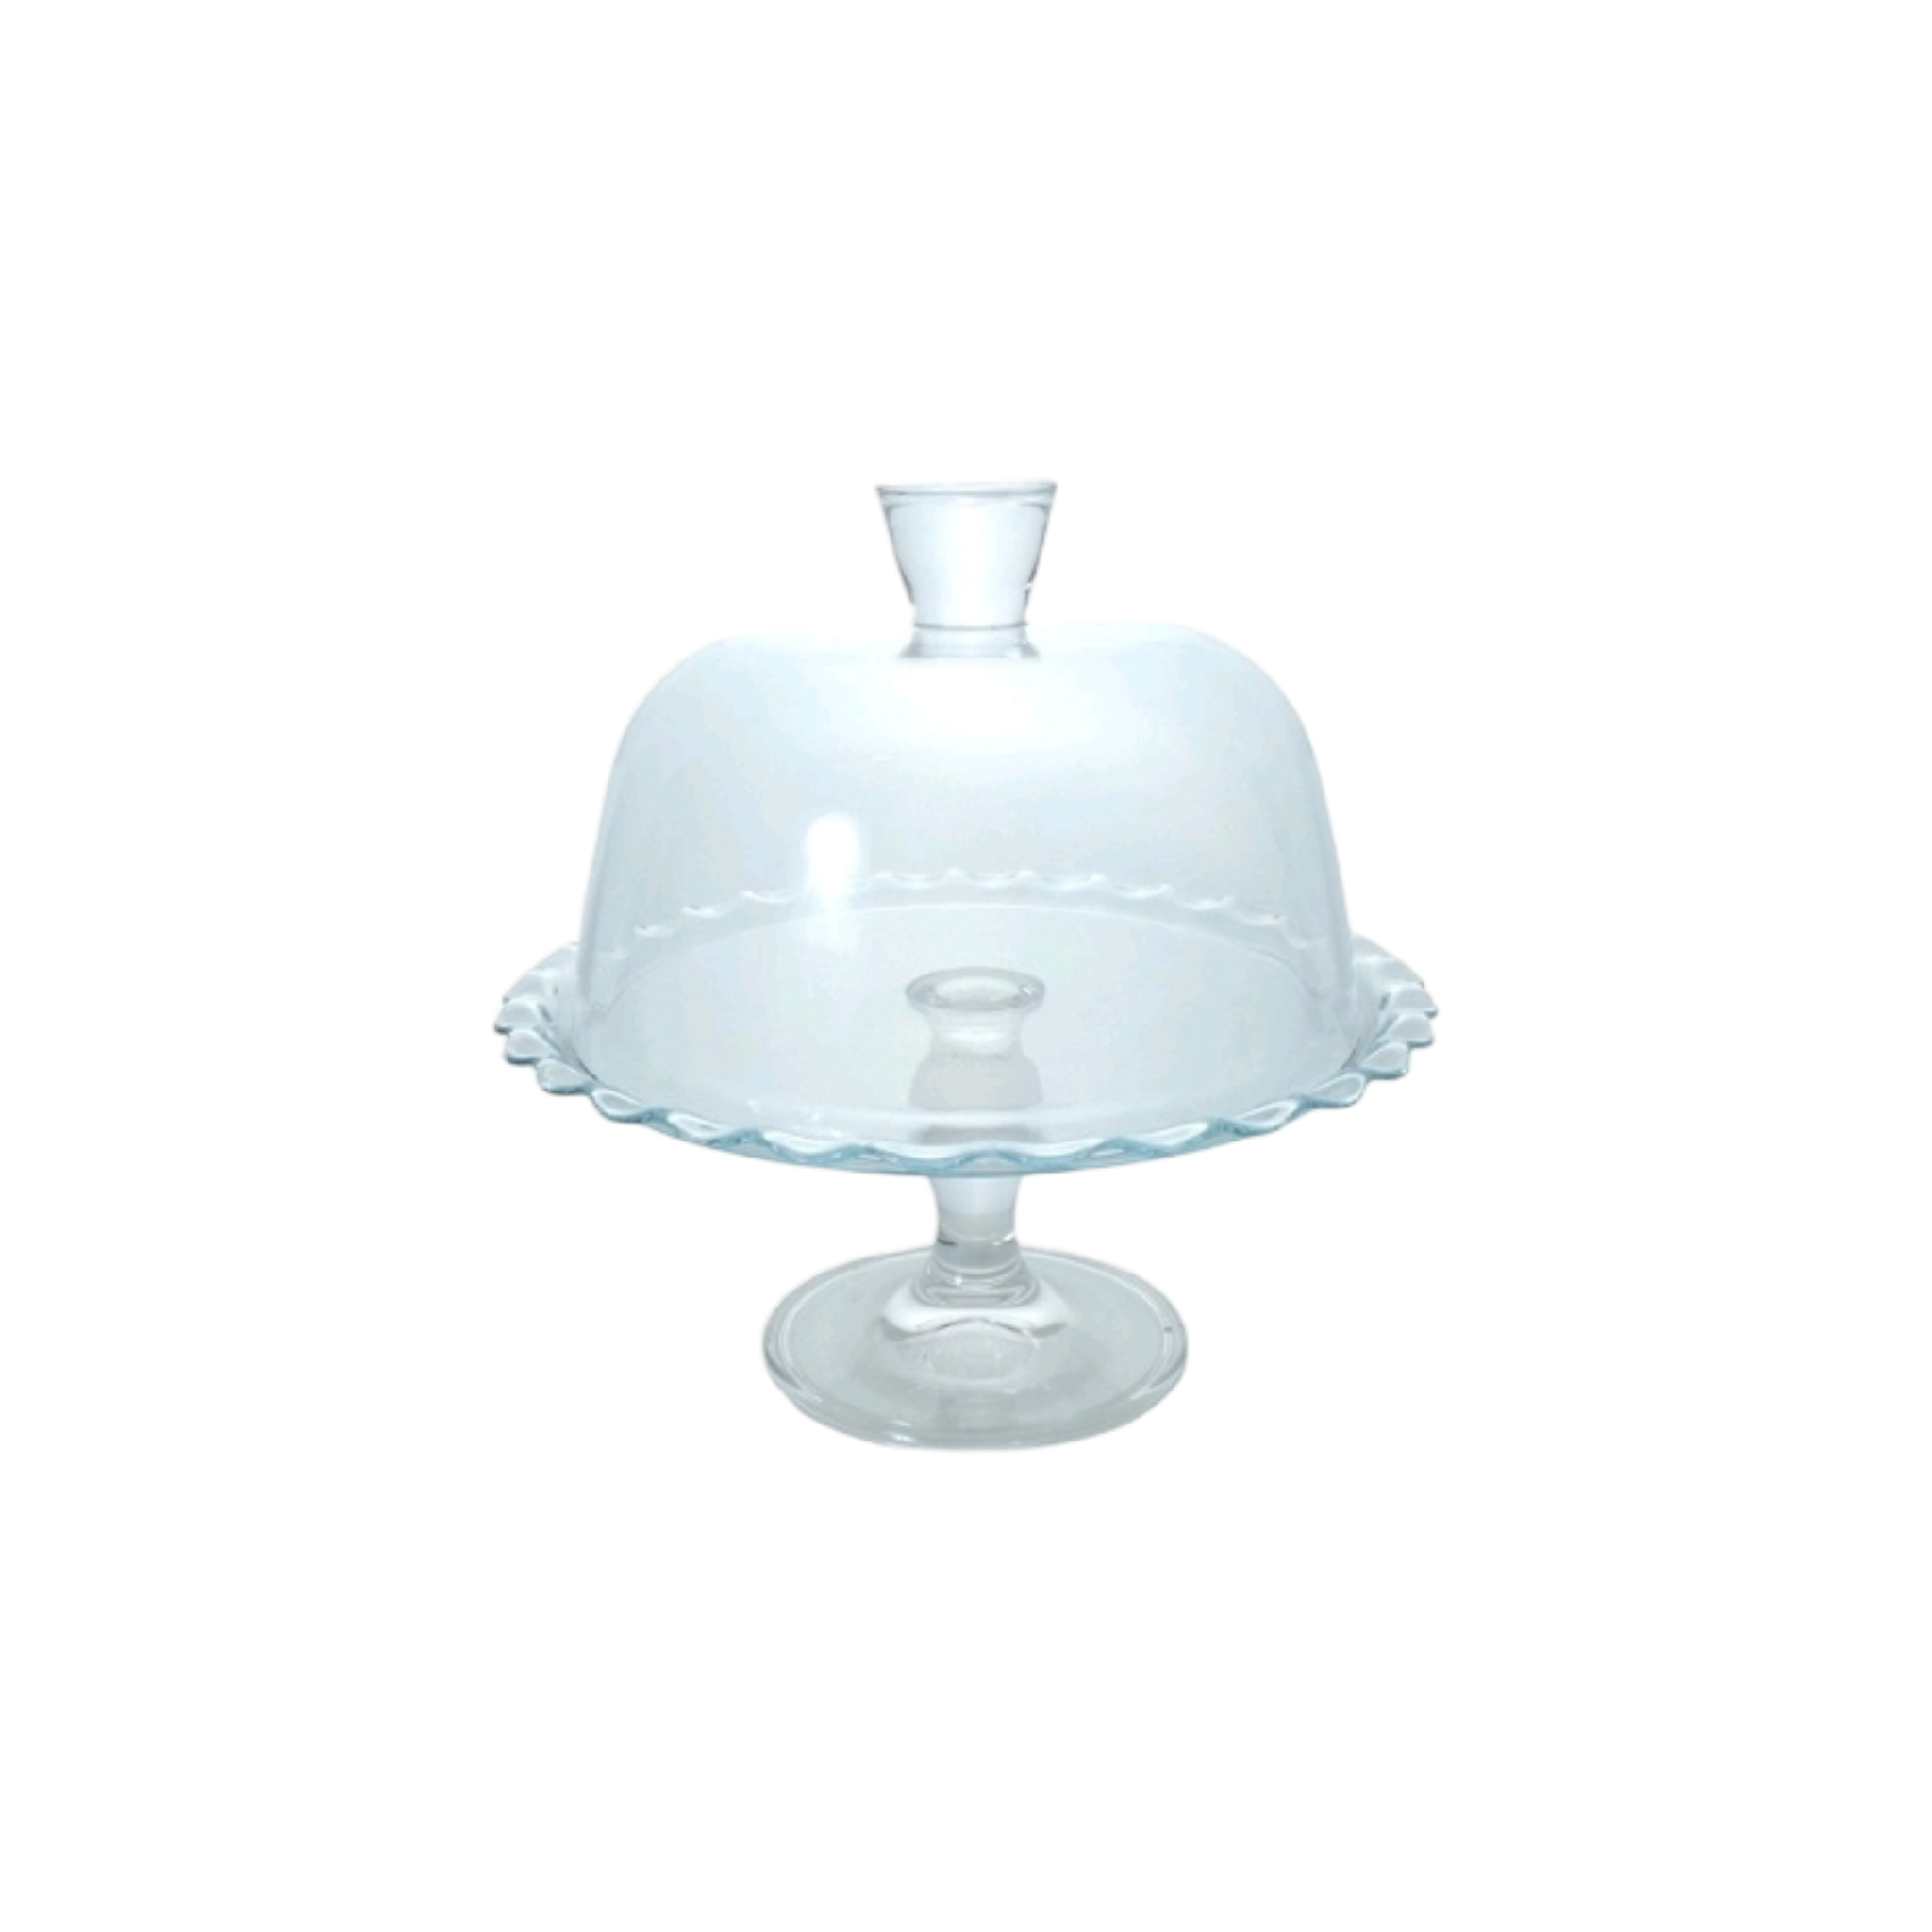 Pasabahce Petit Patisserie Cake Dome 26.4x26cm with Serving Base Tray Footed 23095